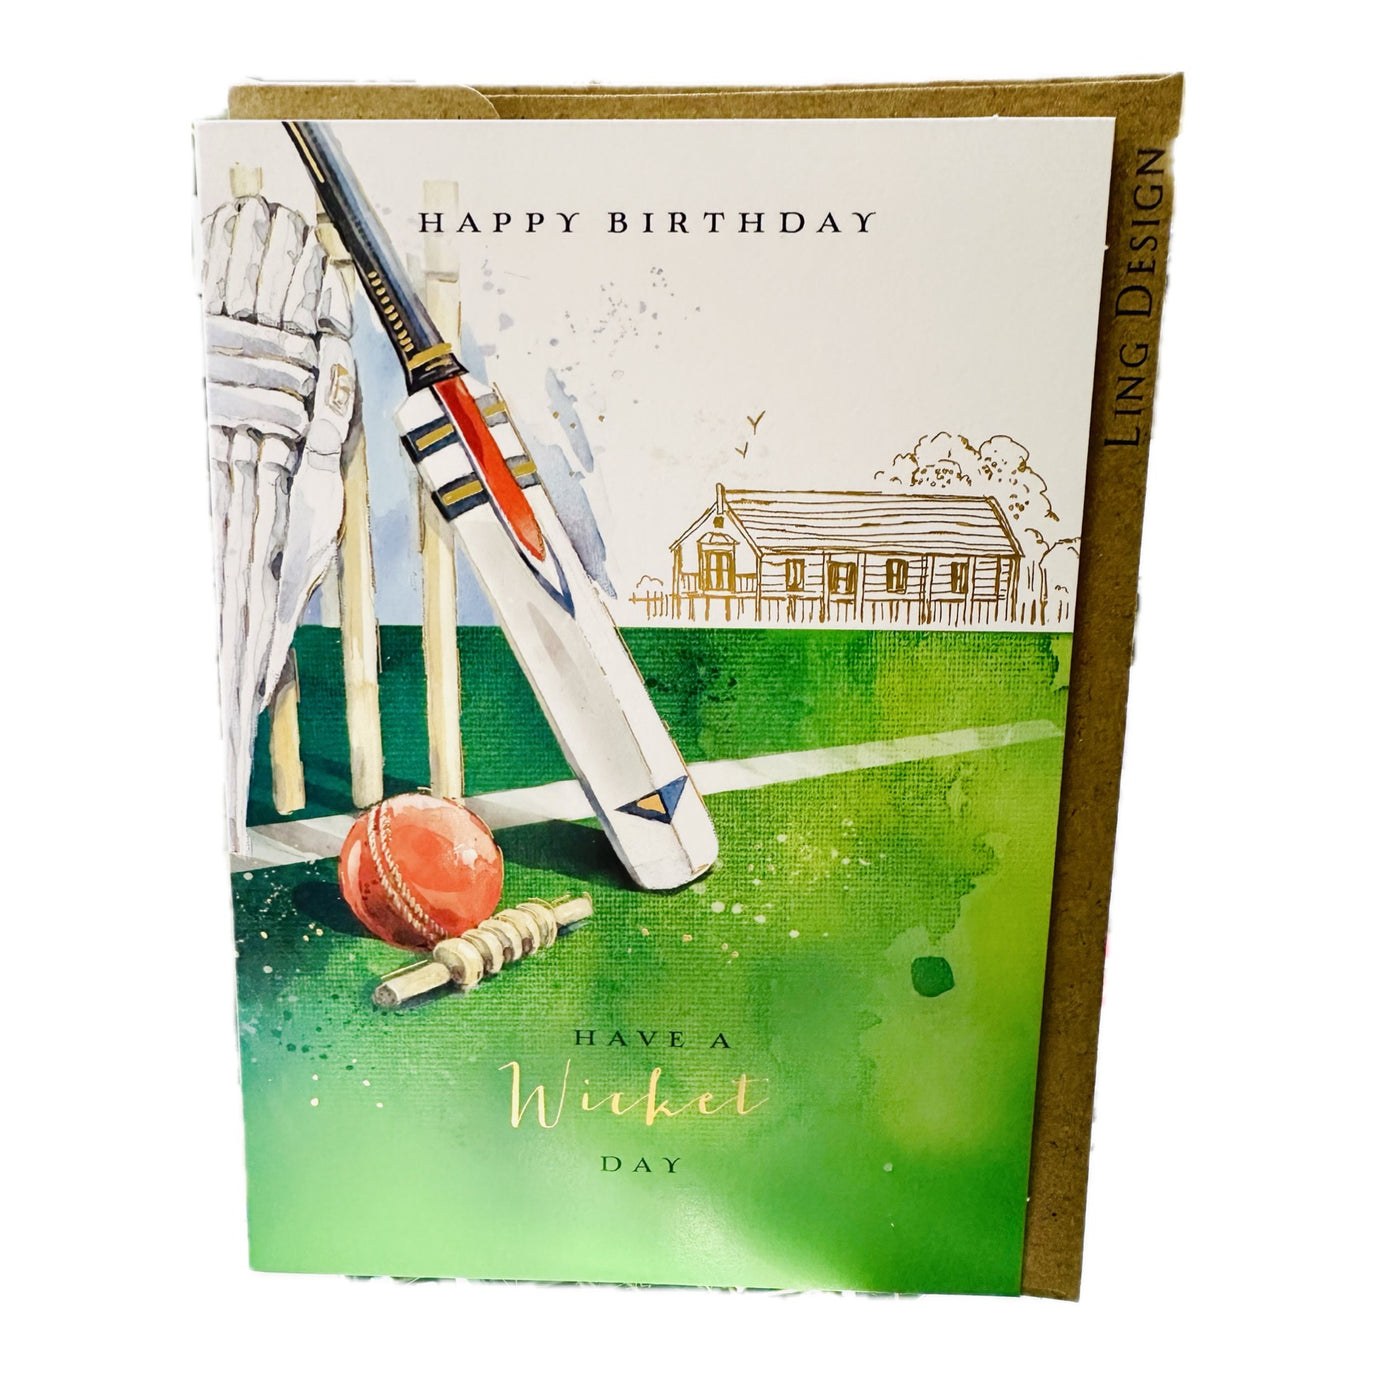 Happy Birthday Cricket Wicket Day Card - Ling Design